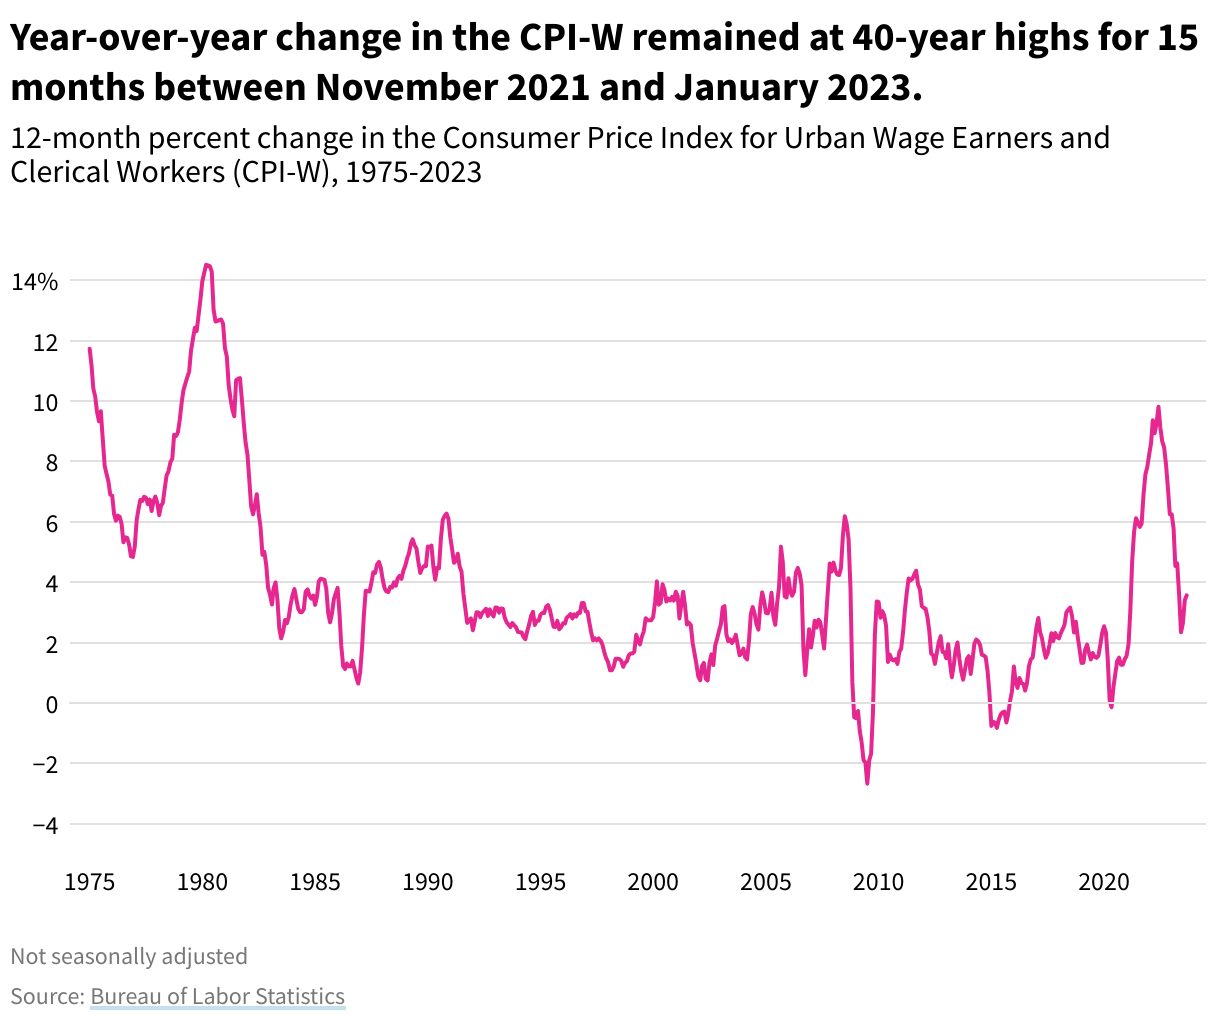 Line graph showing 12-month percent change in the Consumer Price Index for Urban Wage Earners and Clerical Workers (CPI-W) from 1975-2023. The CPI-W has remained at a 40 year high since 2017. 